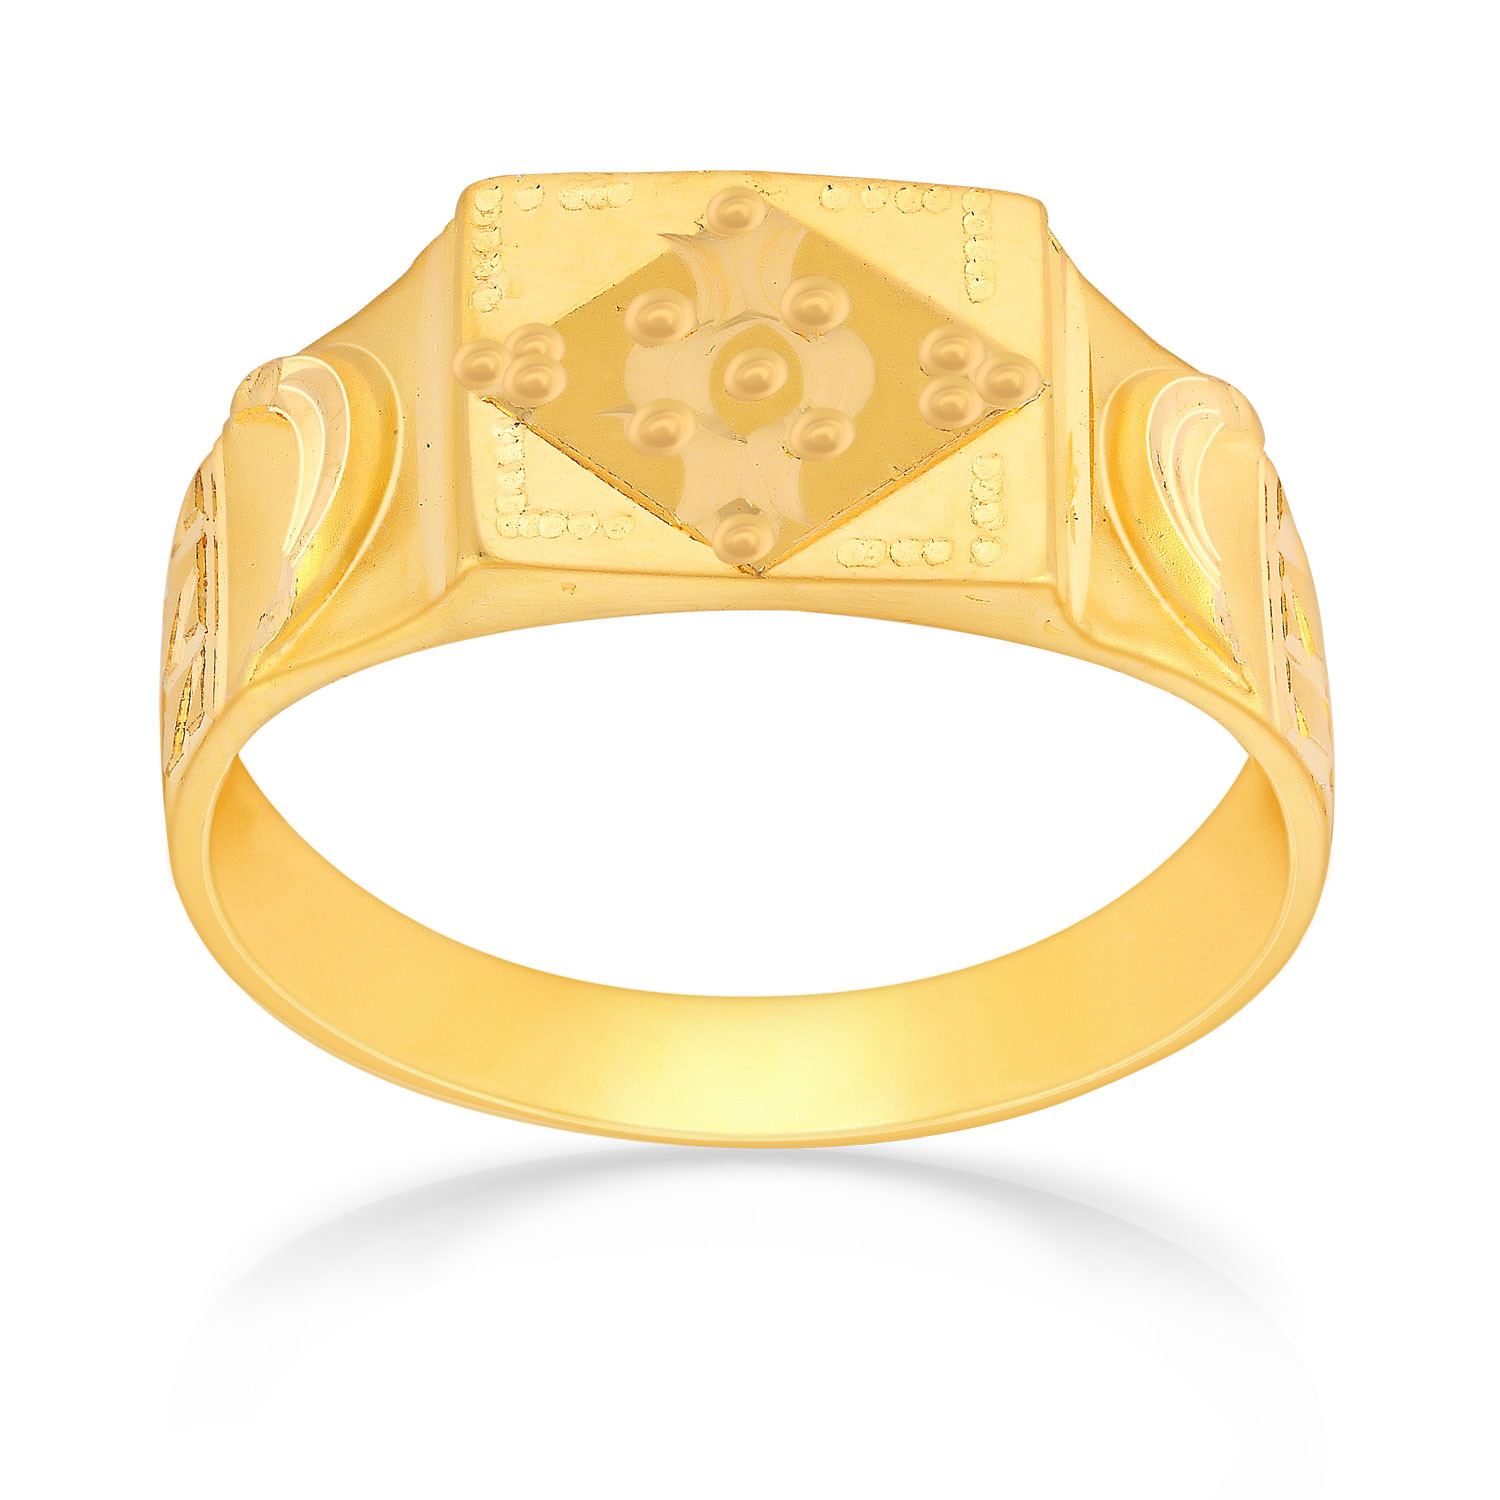 Gold Ring Artistry by OM Jewellers: Timeless Elegance Defined